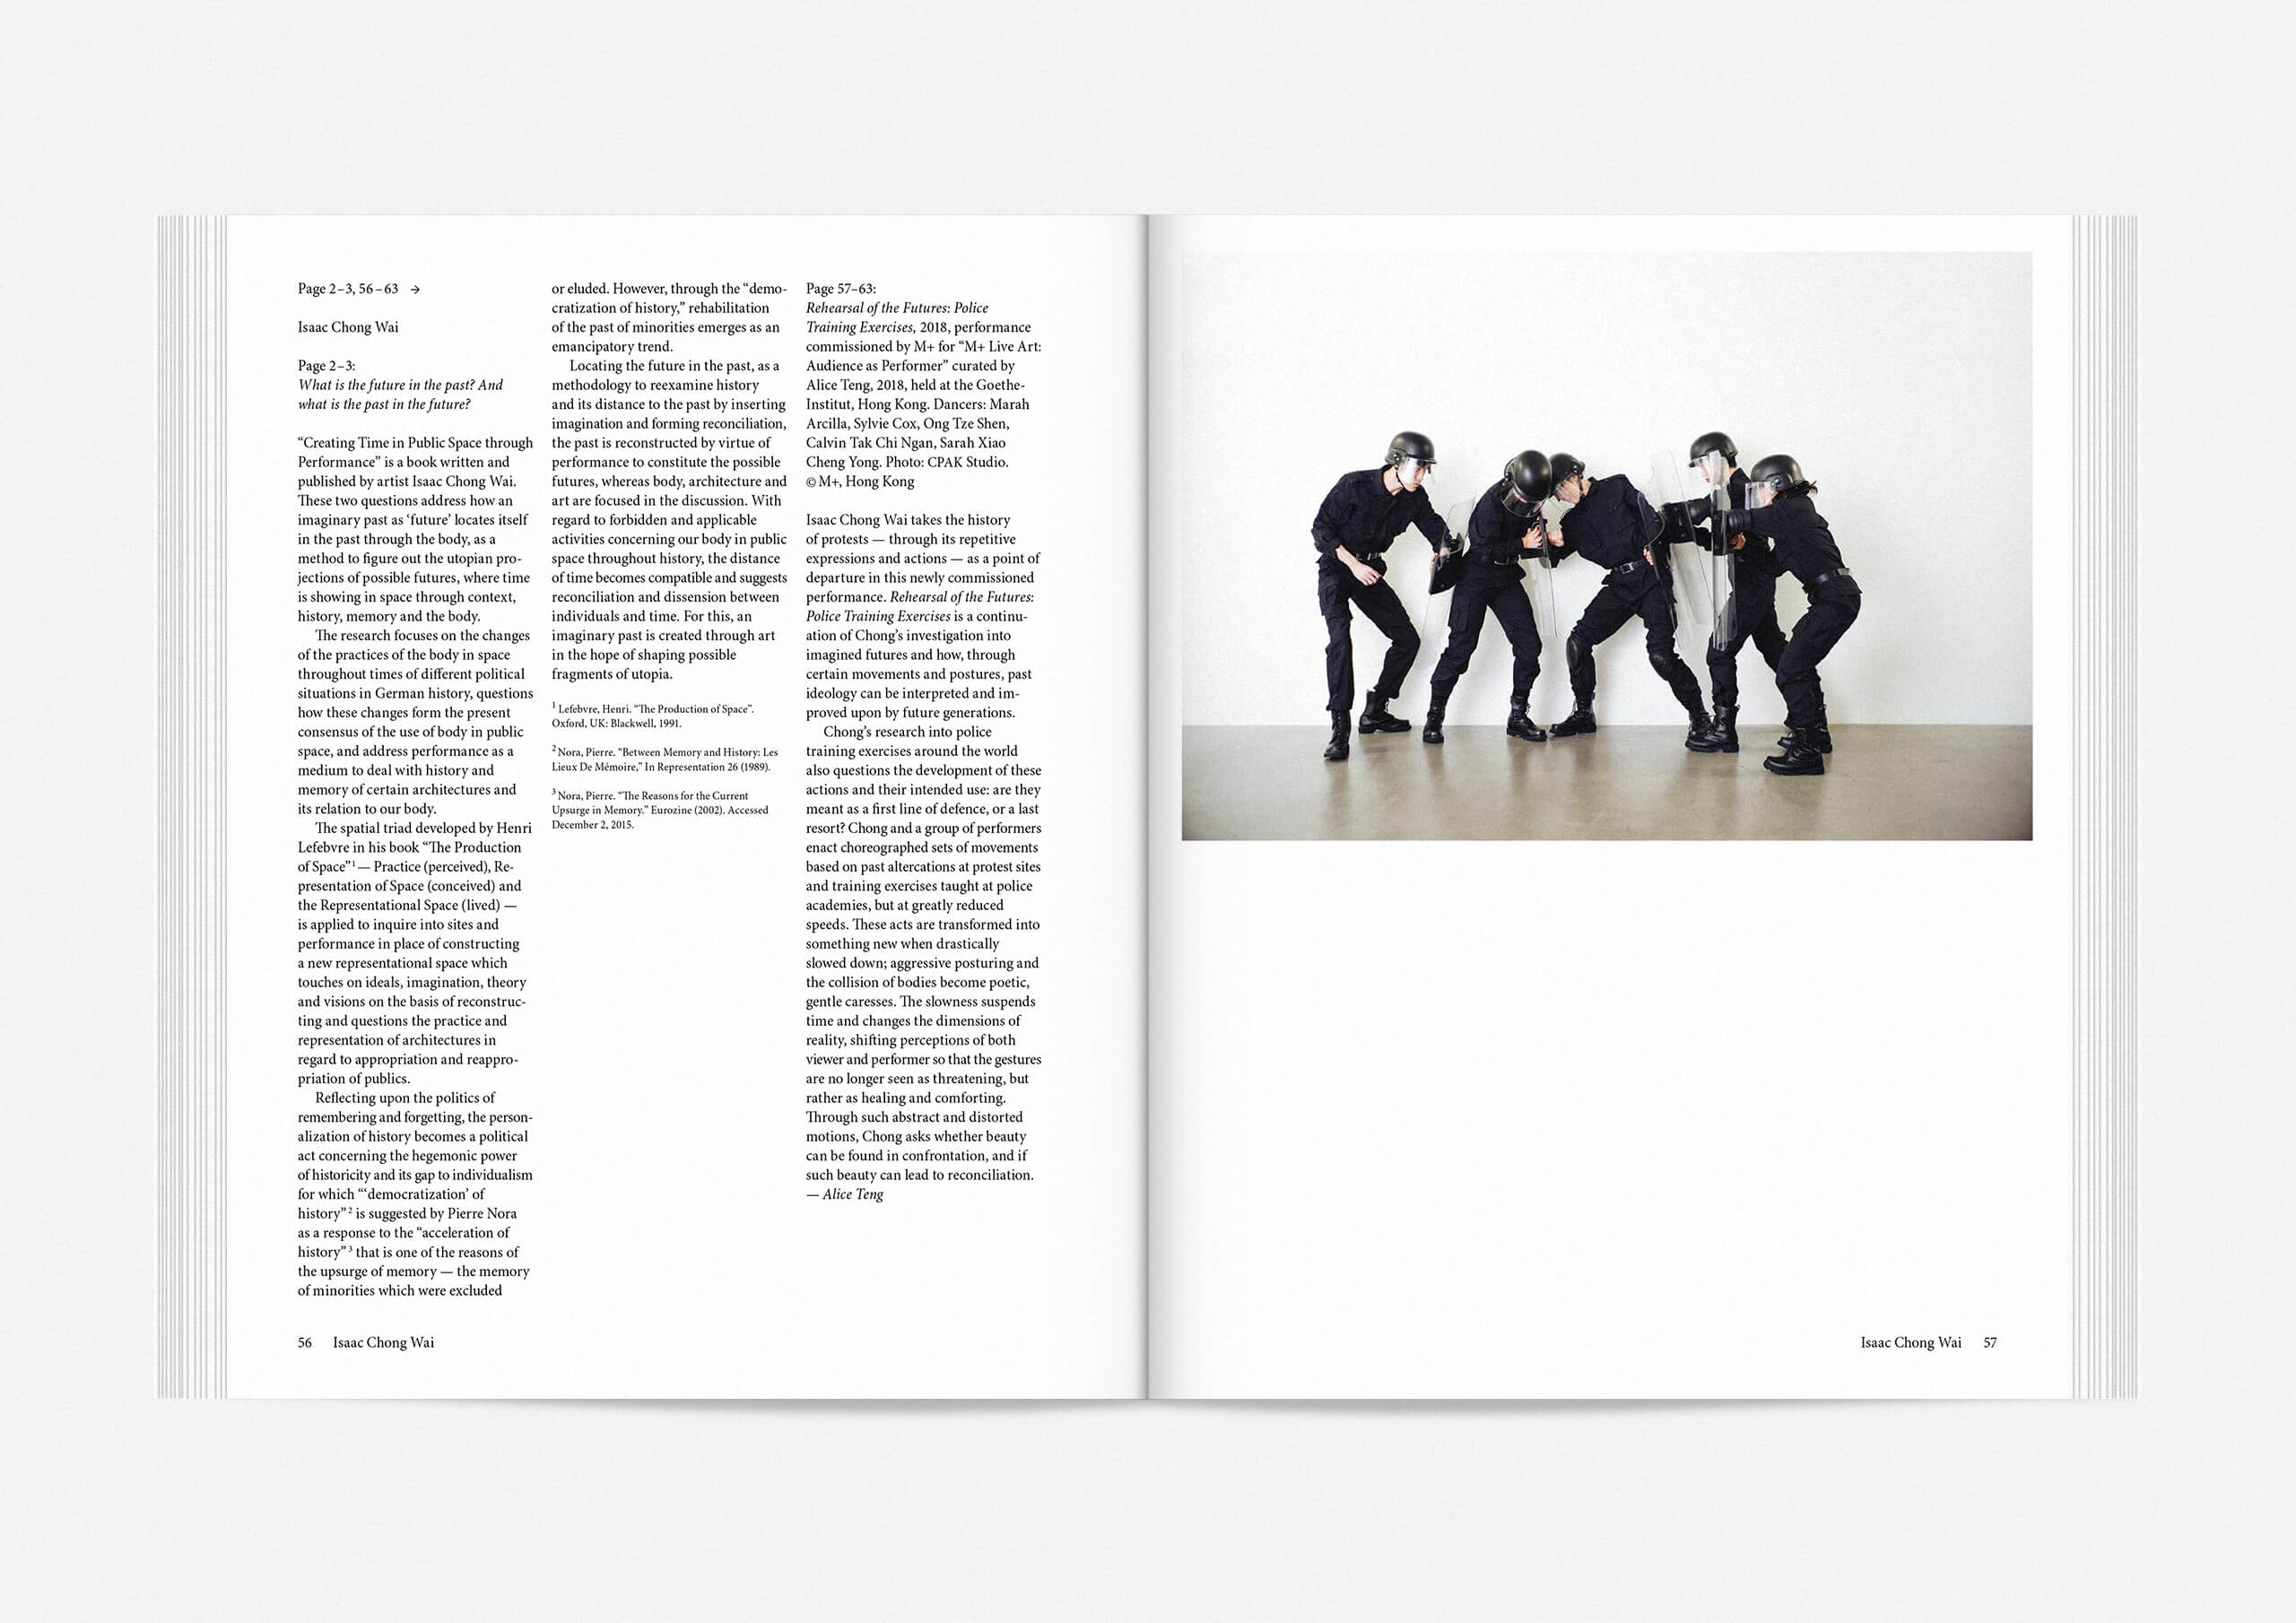 https://neuegestaltung.de/media/pages/clients/protocollum-issue-no-05/a0656c0f26-1710175858/protocollum-5-page-5657-ng.jpg